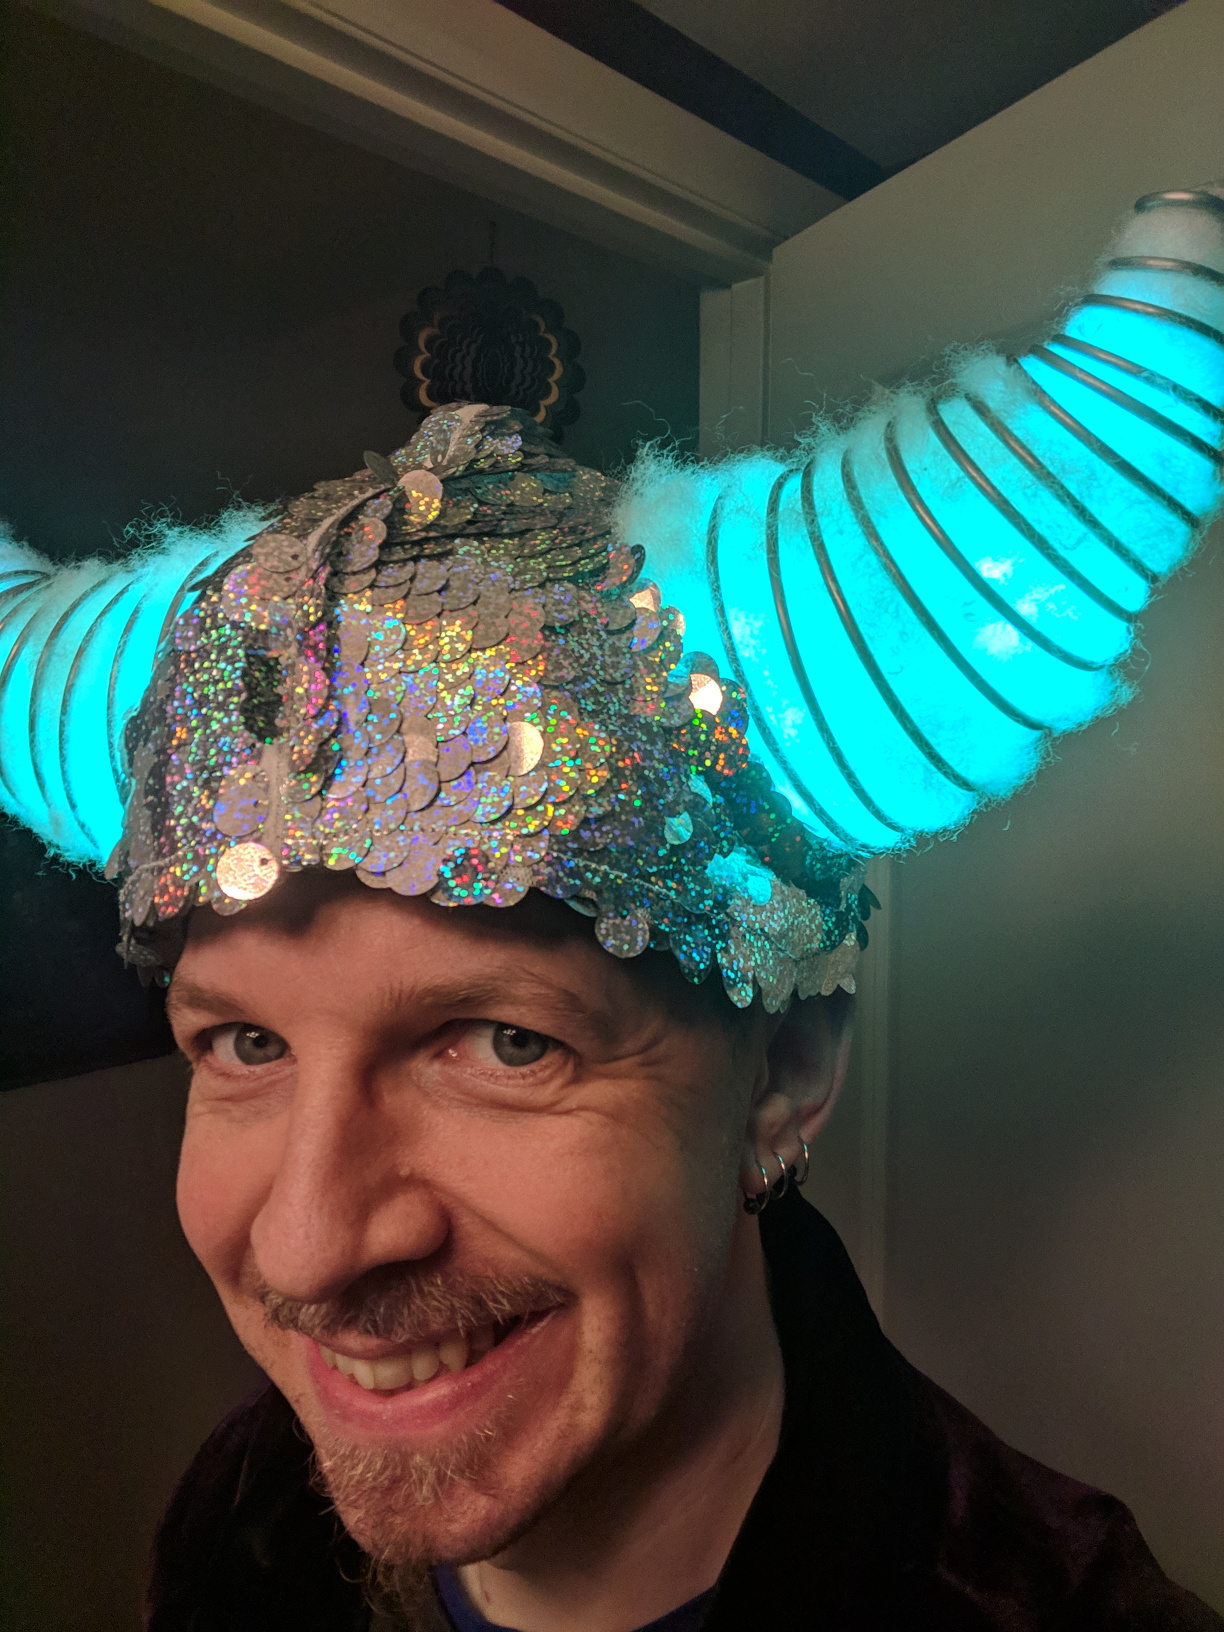 Head shot of Habib smiling wearing the completed helmet with horns glowing.